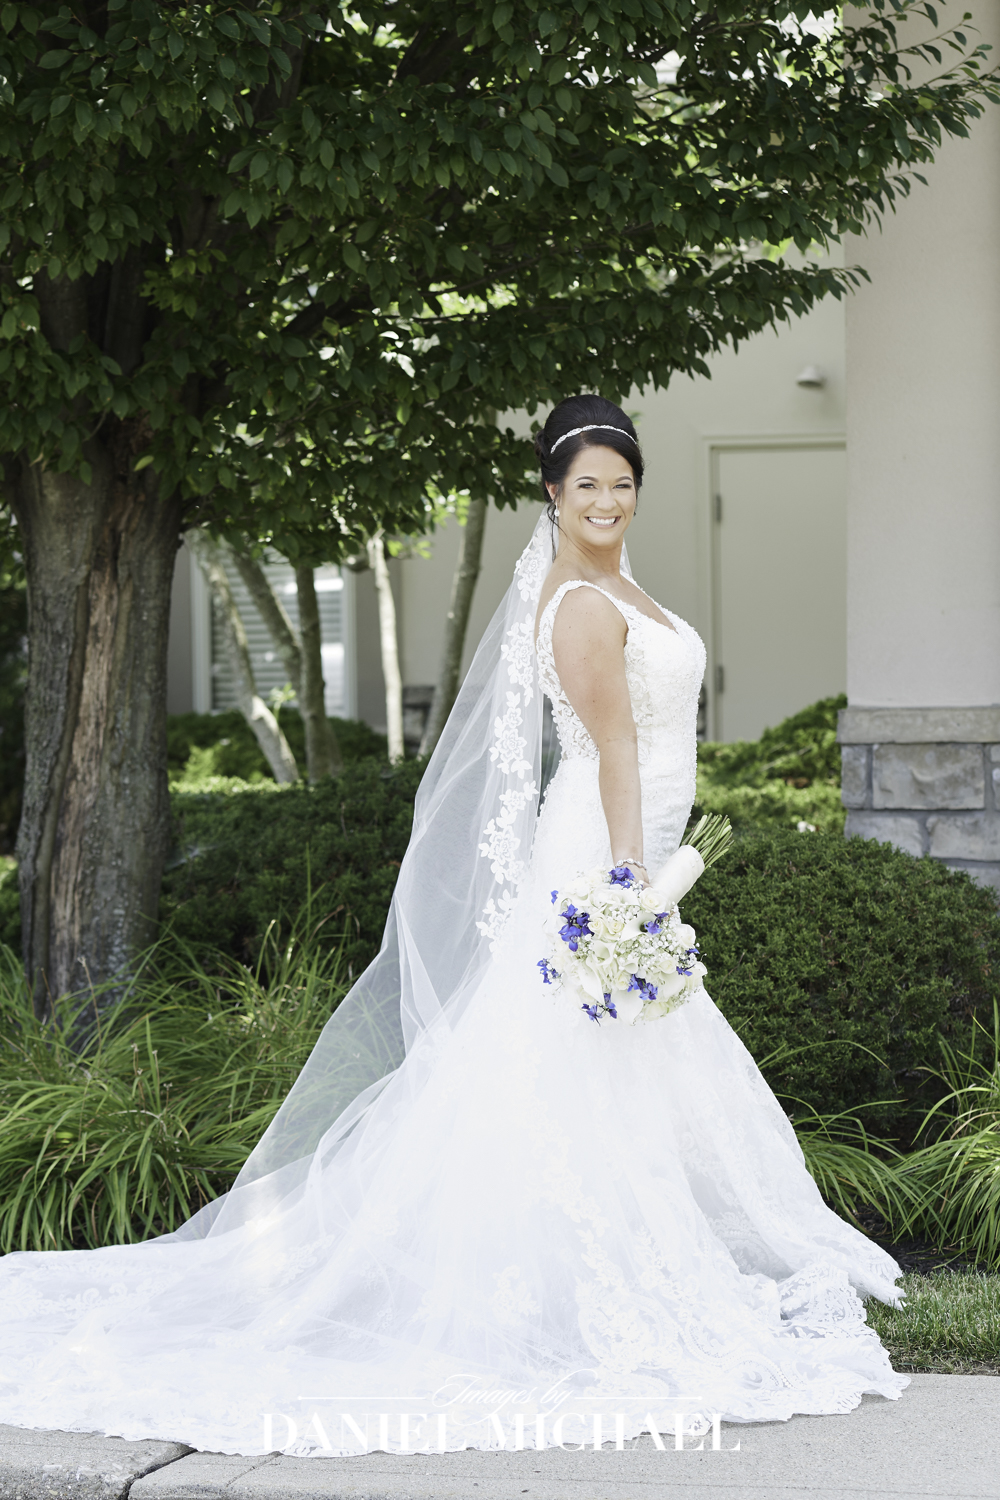 Lace Bridal Gown Wedding Photographer